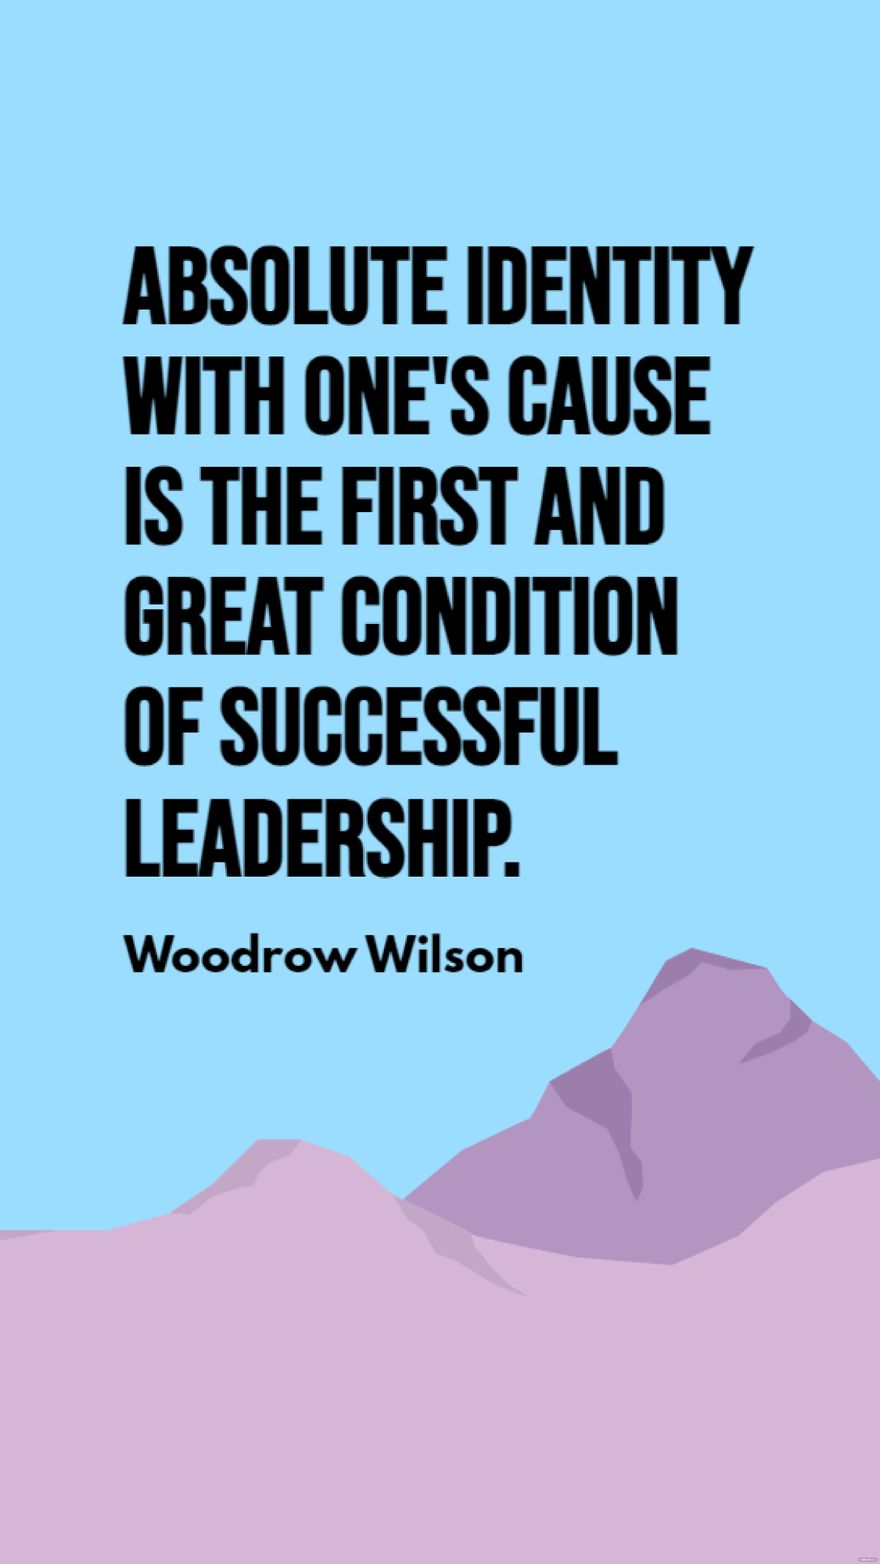 Free Woodrow Wilson - Absolute identity with one's cause is the first and great condition of successful leadership. in JPG